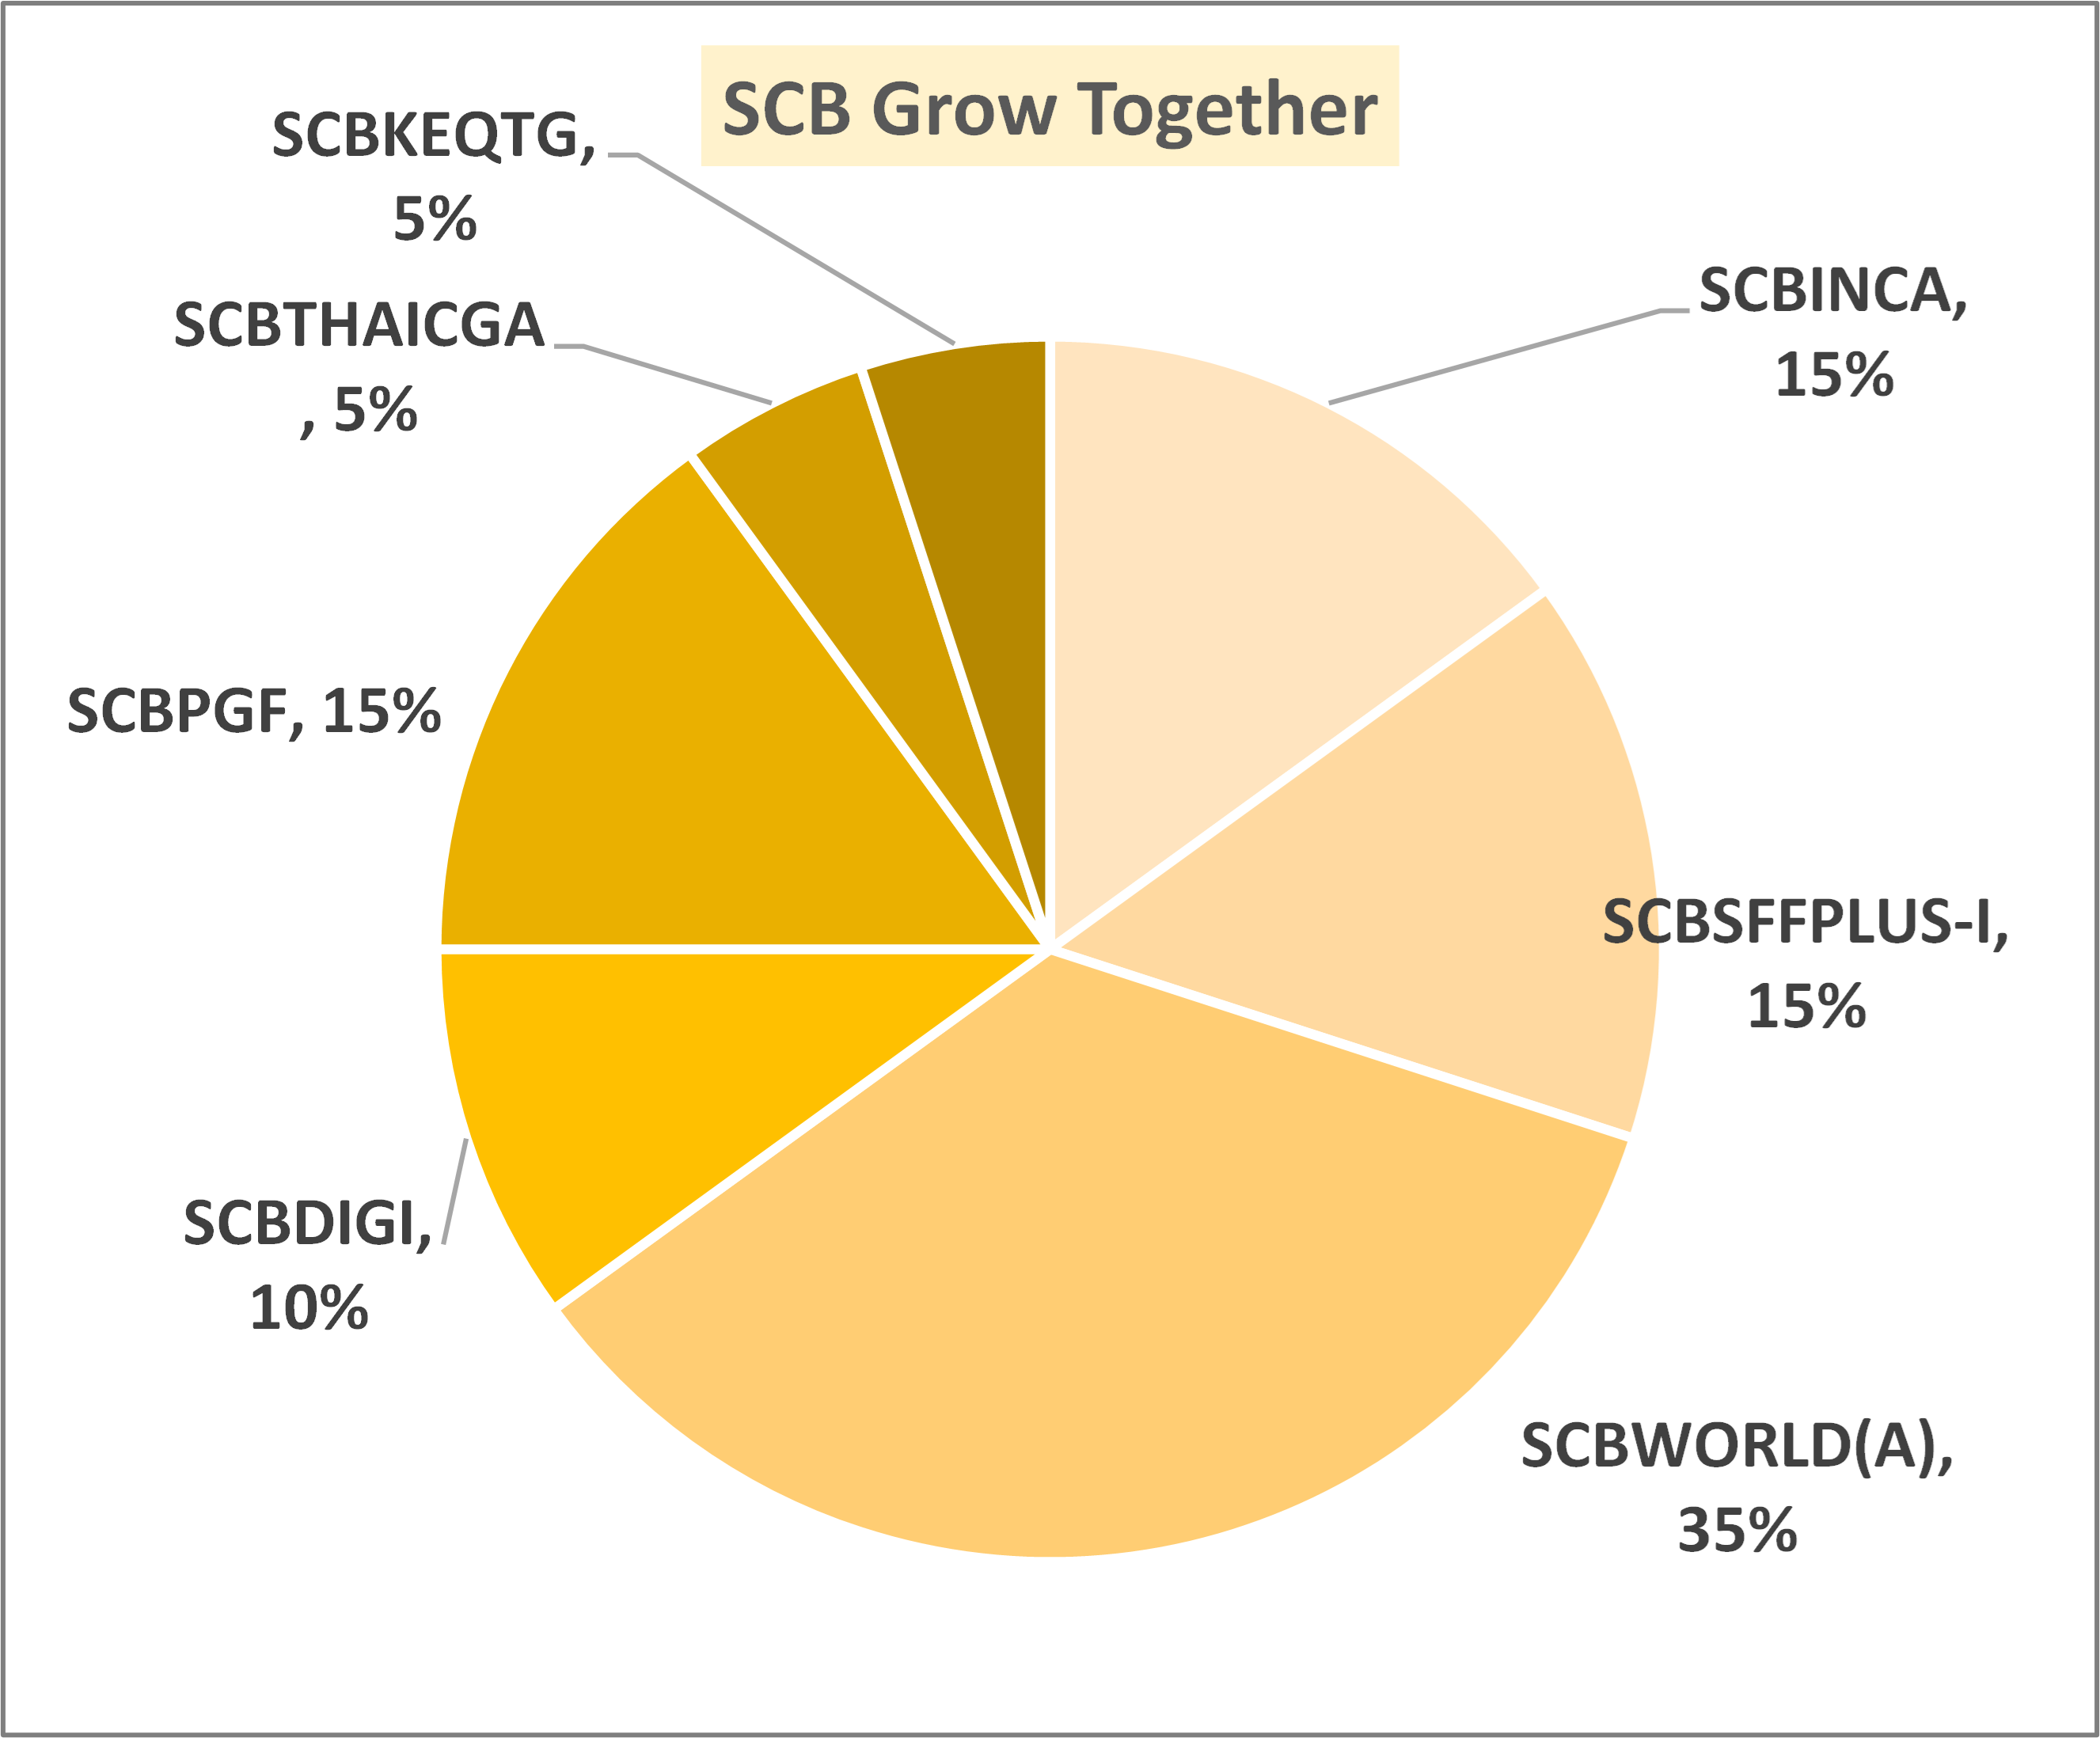 SCB Grow Together